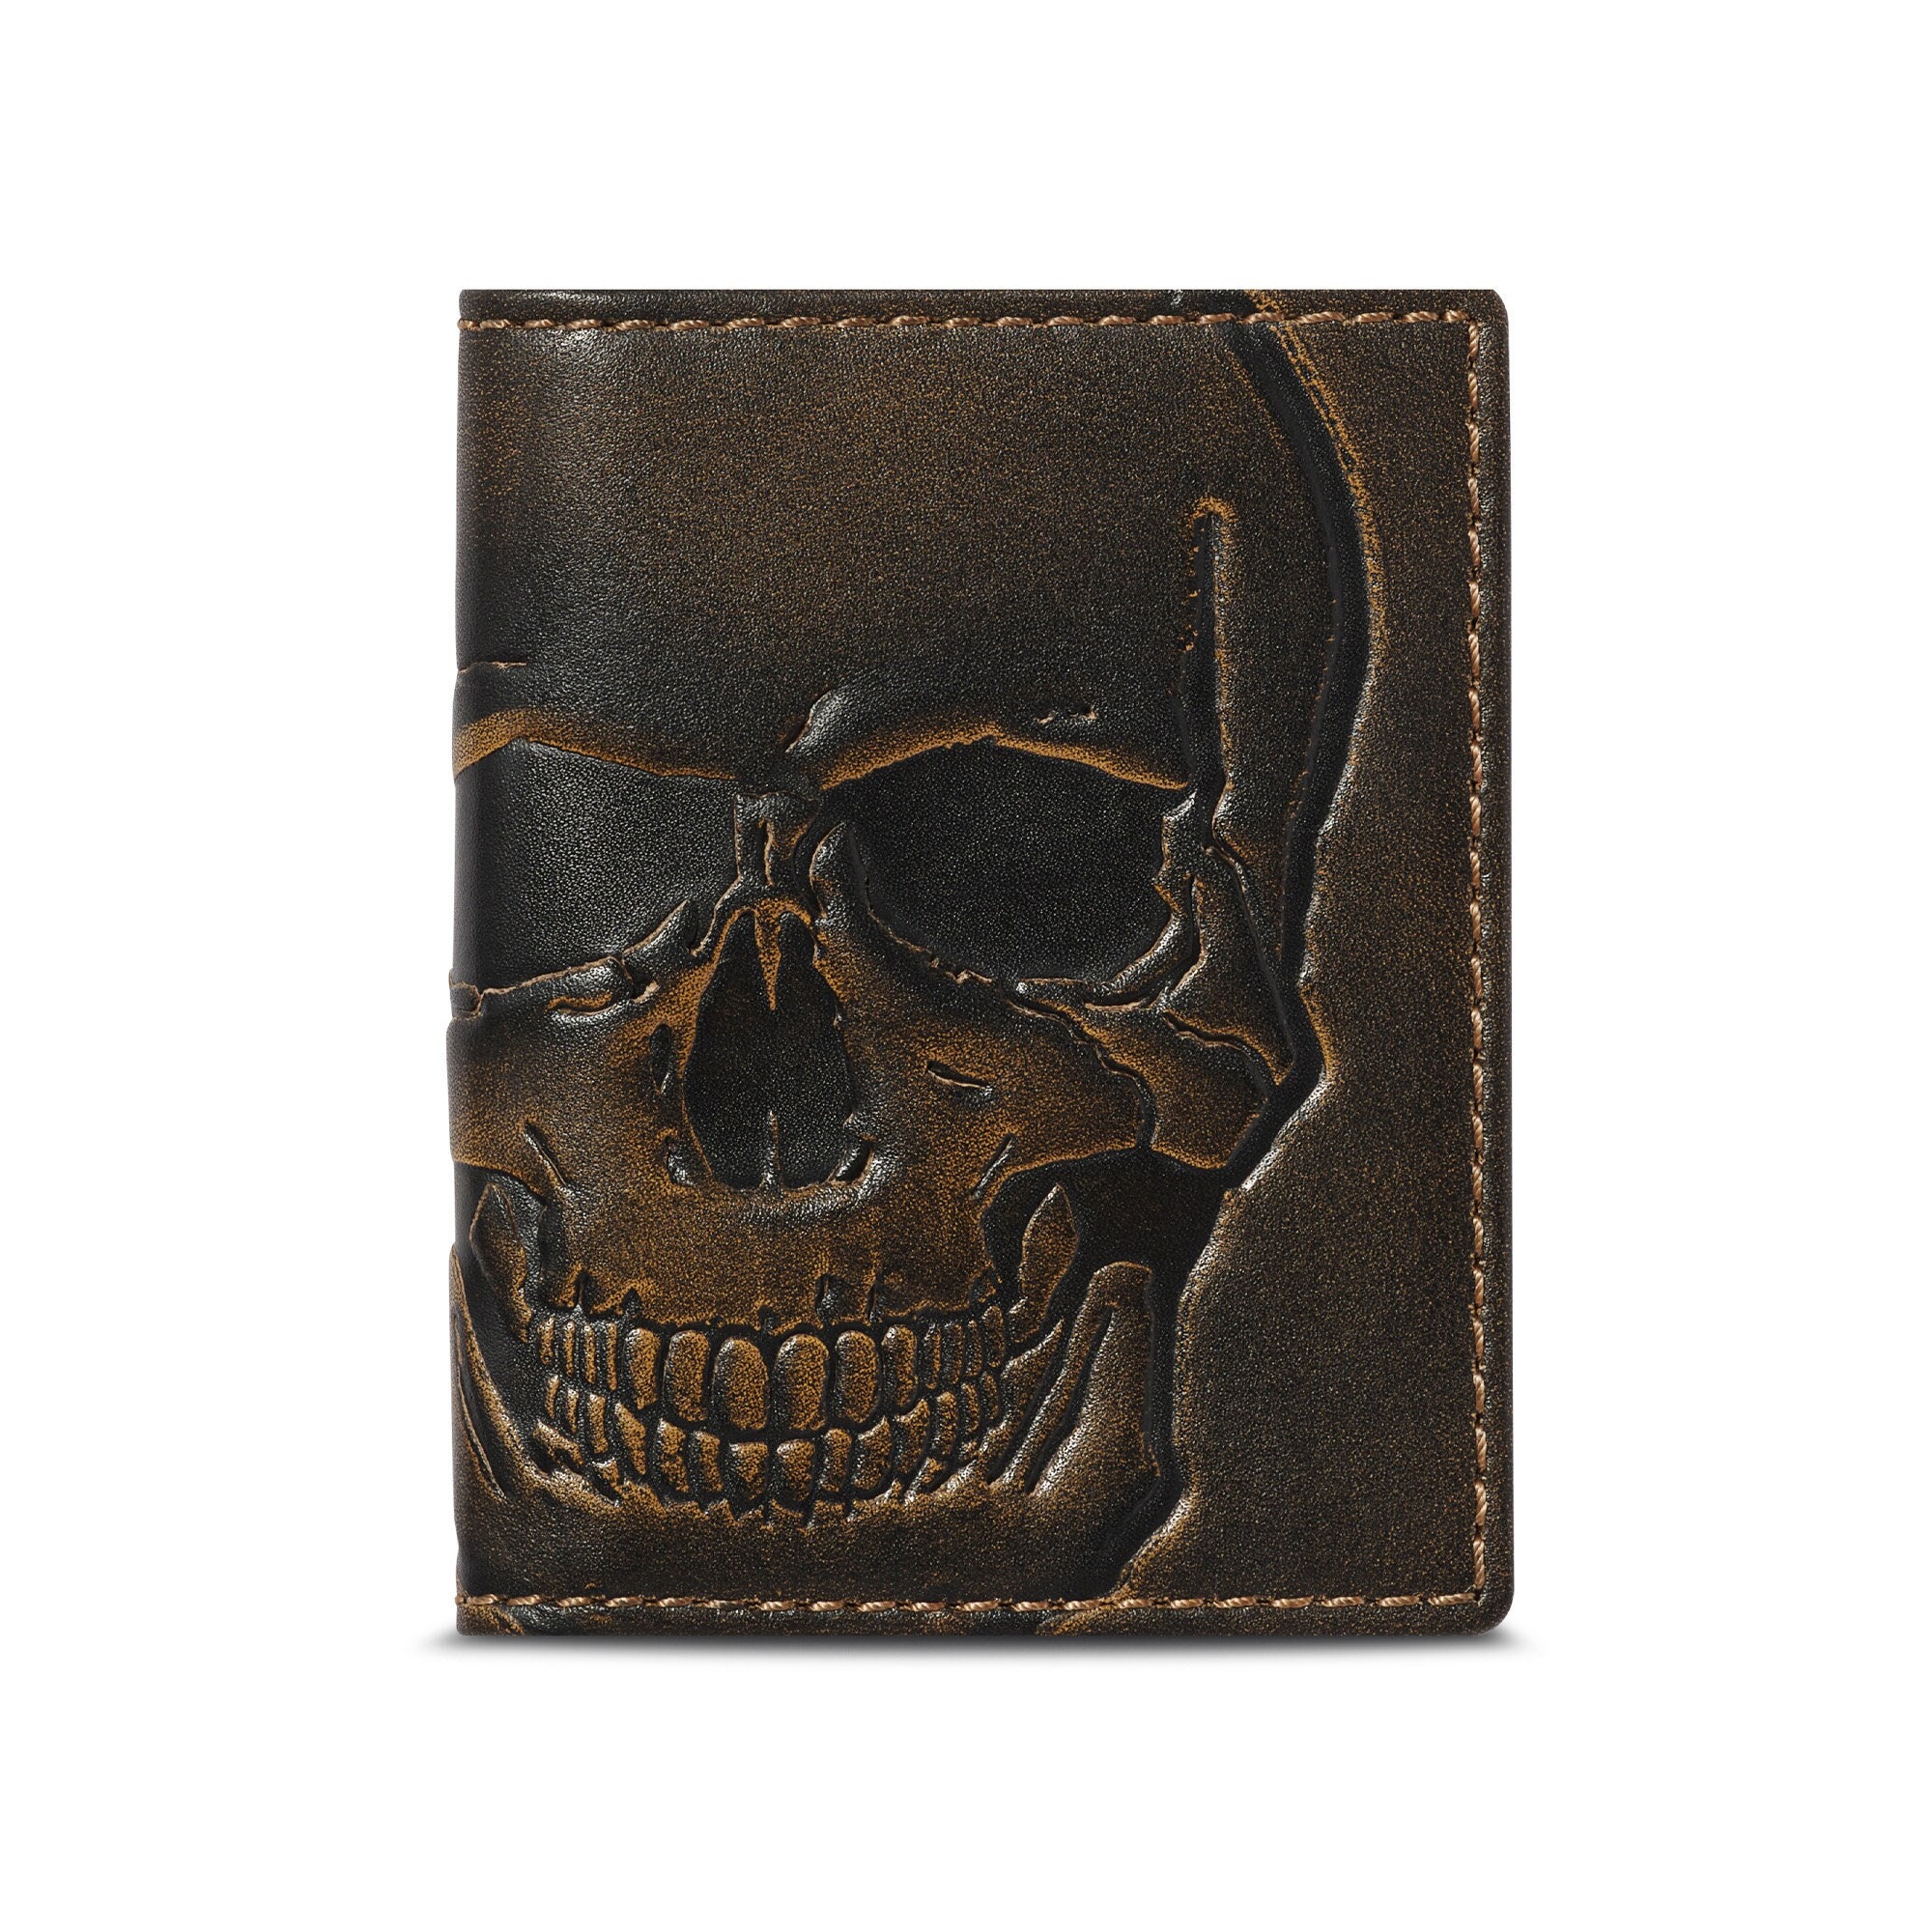 Unik Tri-fold Biker's wallet with hand painted skulls and chain – Sur Tan  Mfg. Co.